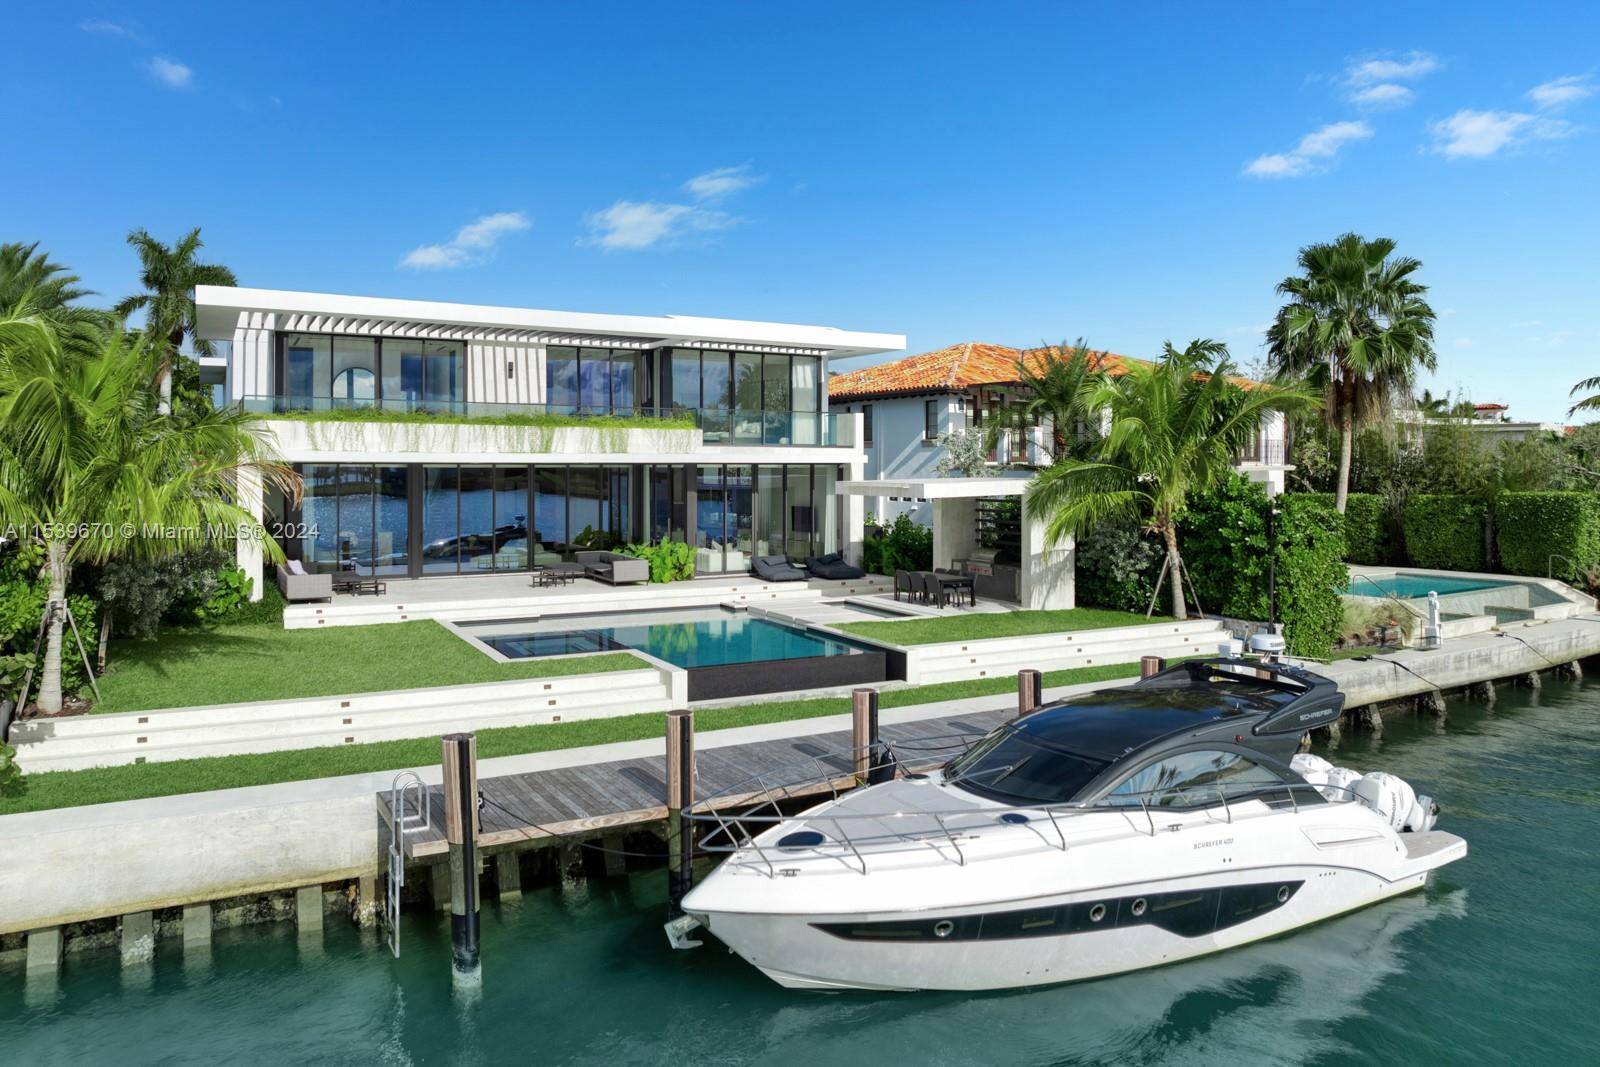 This brand new modern masterpiece is situated on the SW edge of Bay Harbor Islands, overlooking Indian Creek.